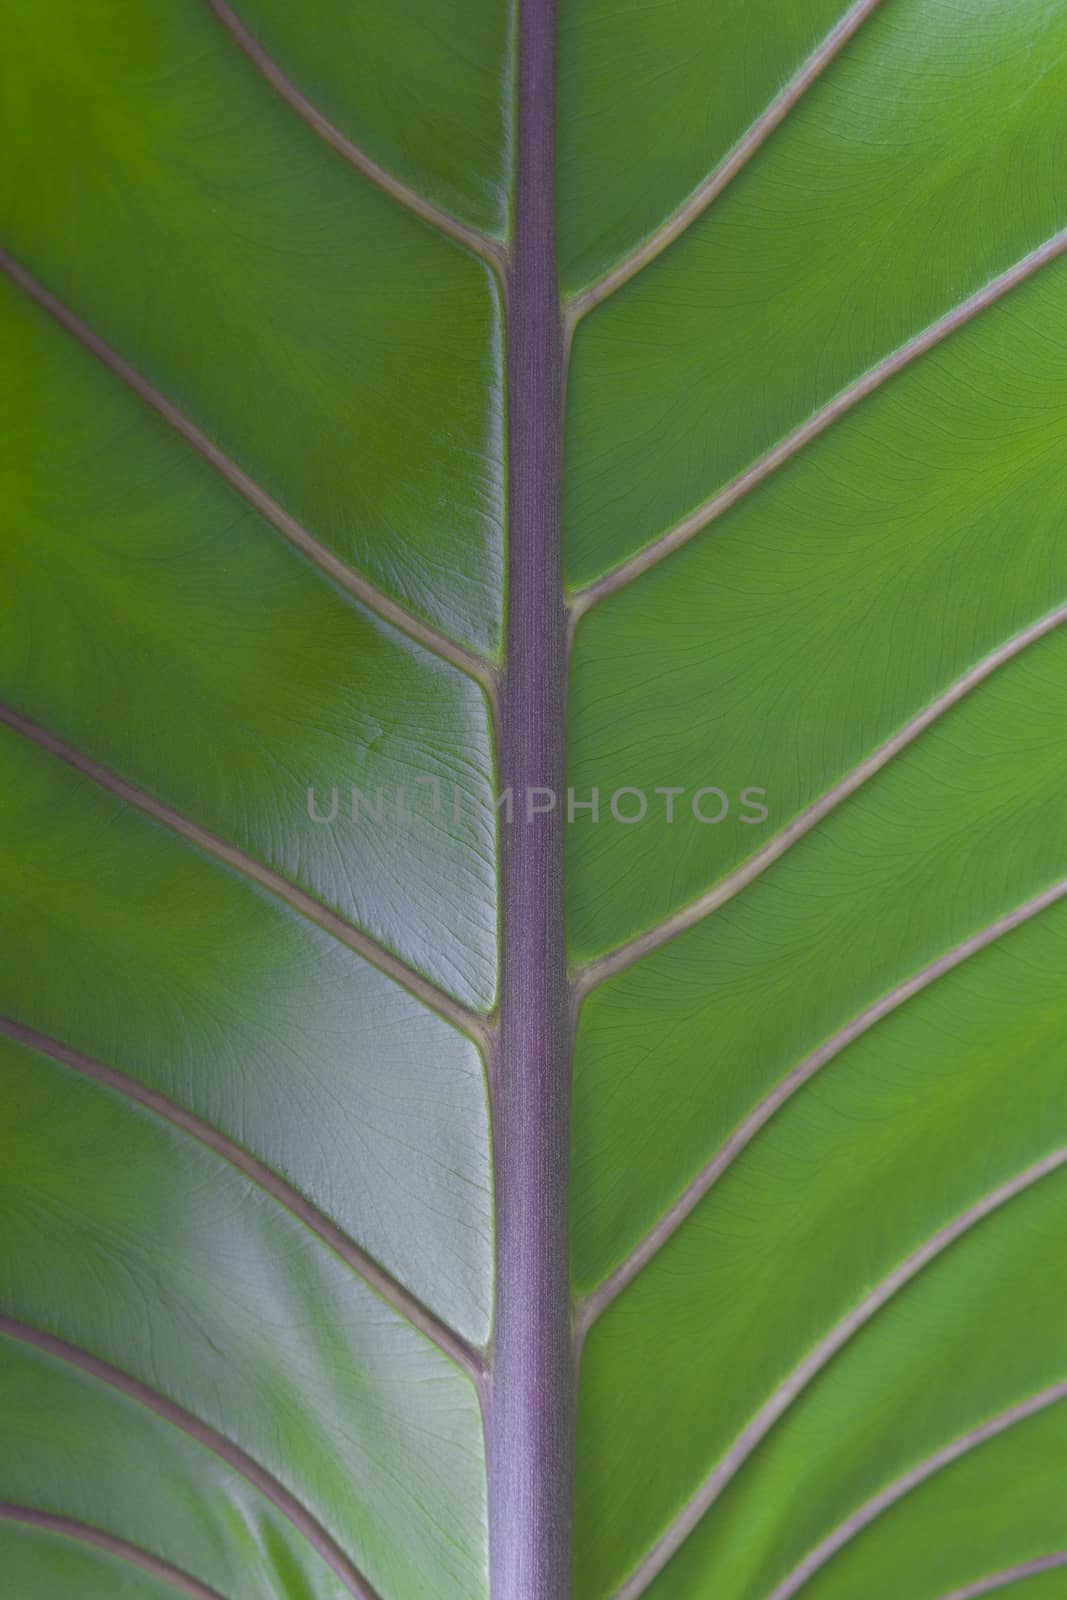 Leaf surface, leaves very large structures and fiber components of the leaves.